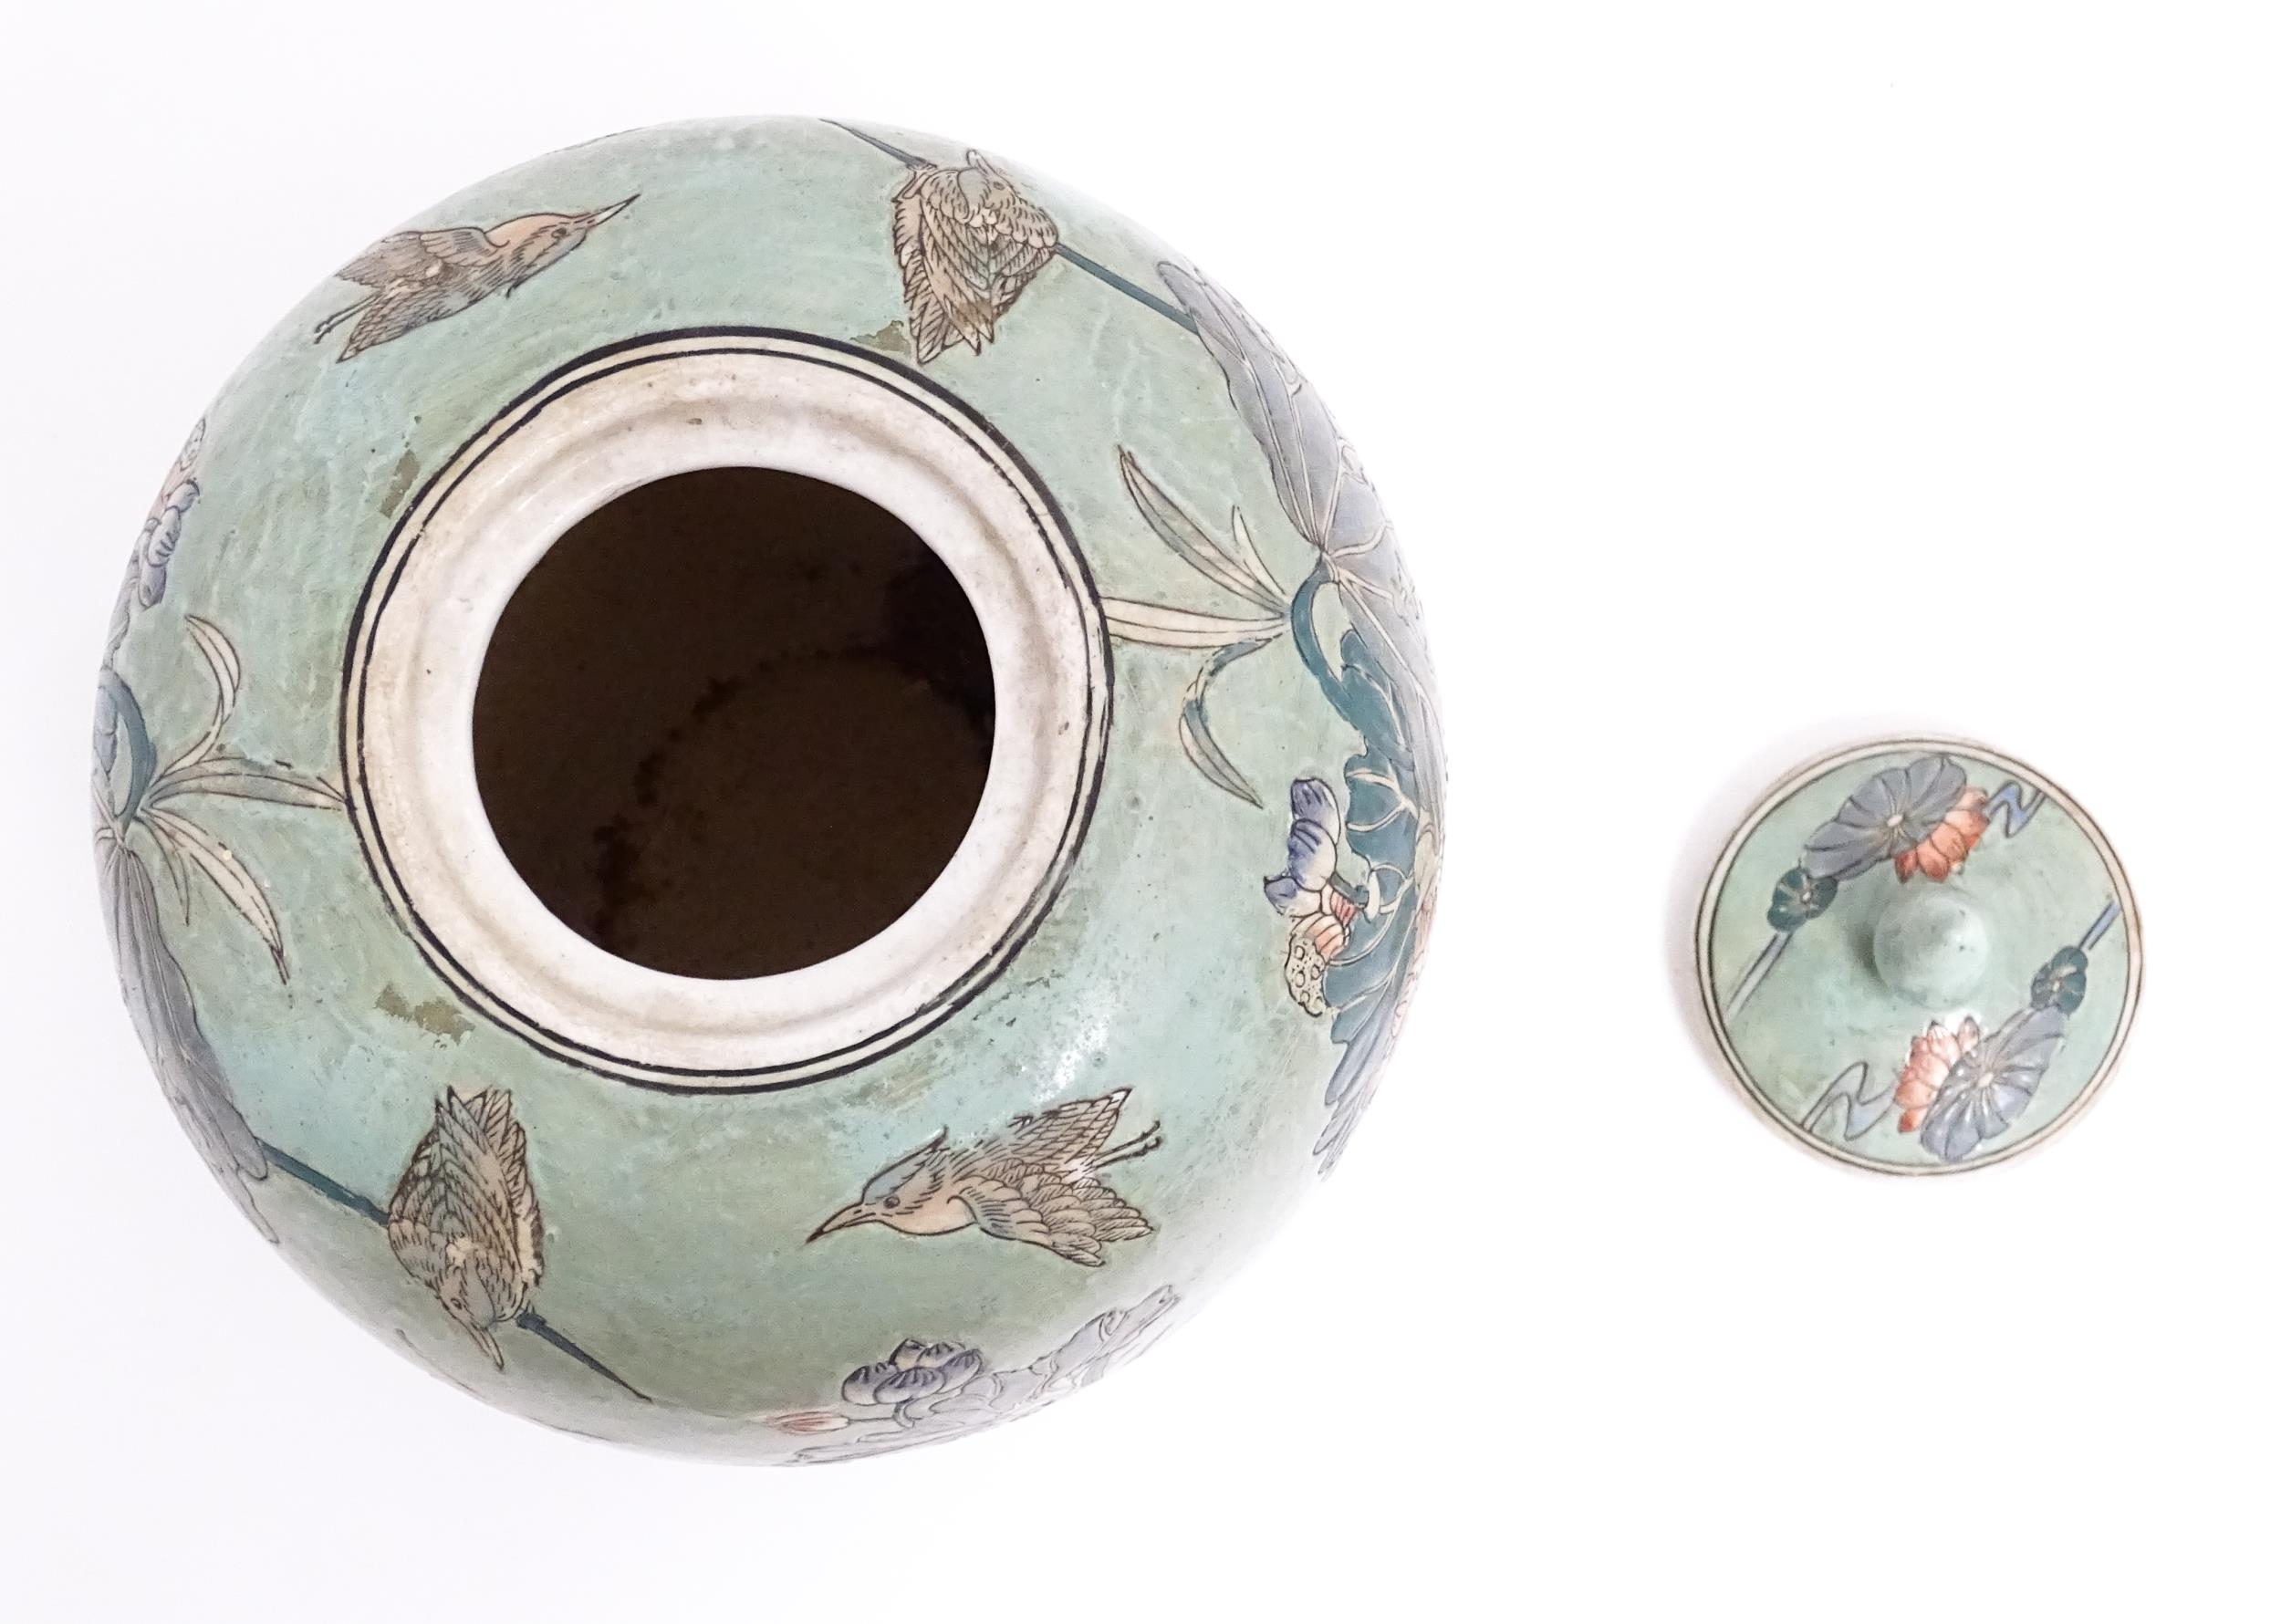 A Chinese ginger jar with celadon style glaze decorated with crane birds, flowers, lily pads, etc. - Image 7 of 8